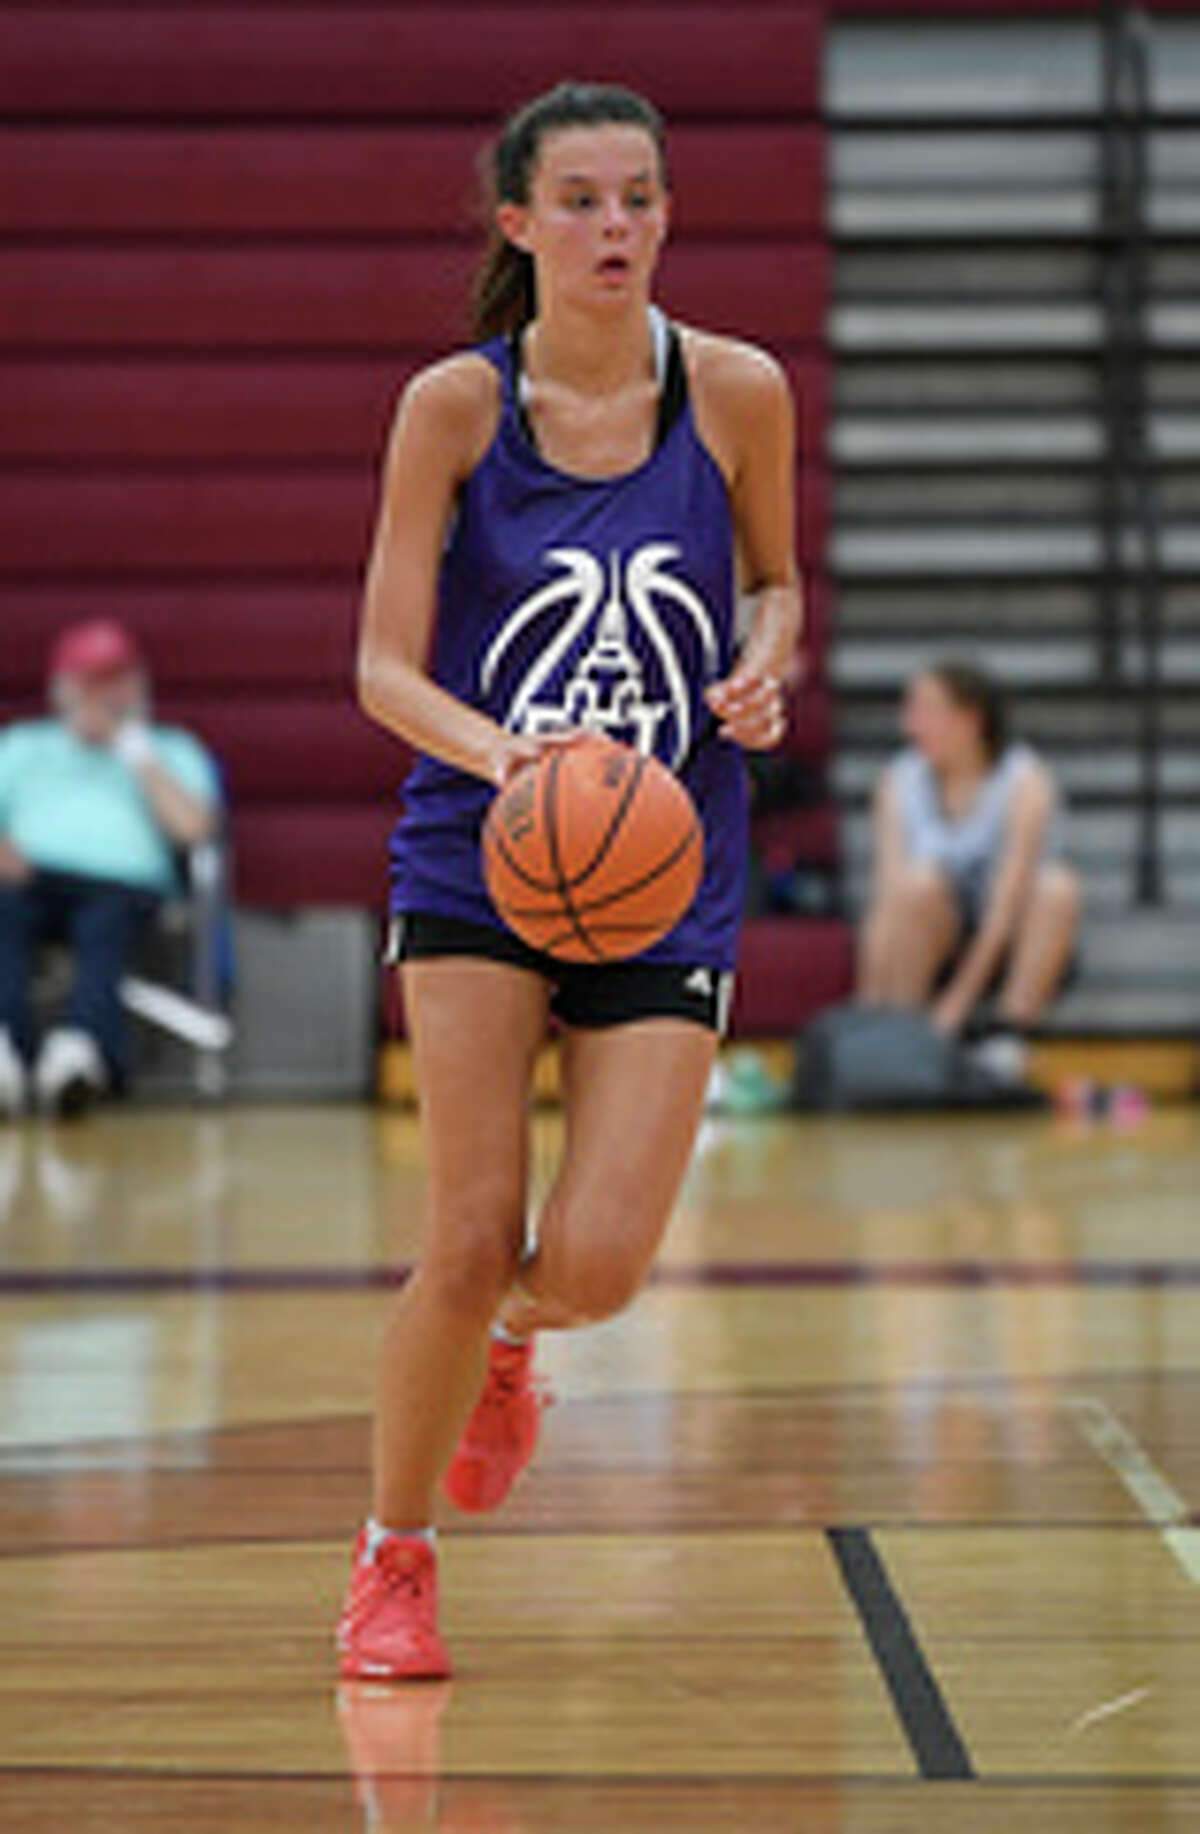 Power UpA?•s Sophie Tougas of Bradford Christian moves the ball against Next Big Things during a Empire State Takeover girls' basketball league game Wednesday, July 17, 2019, at Union College in Schenectady, N.Y. (Hans Pennink / Special to the Times Union)